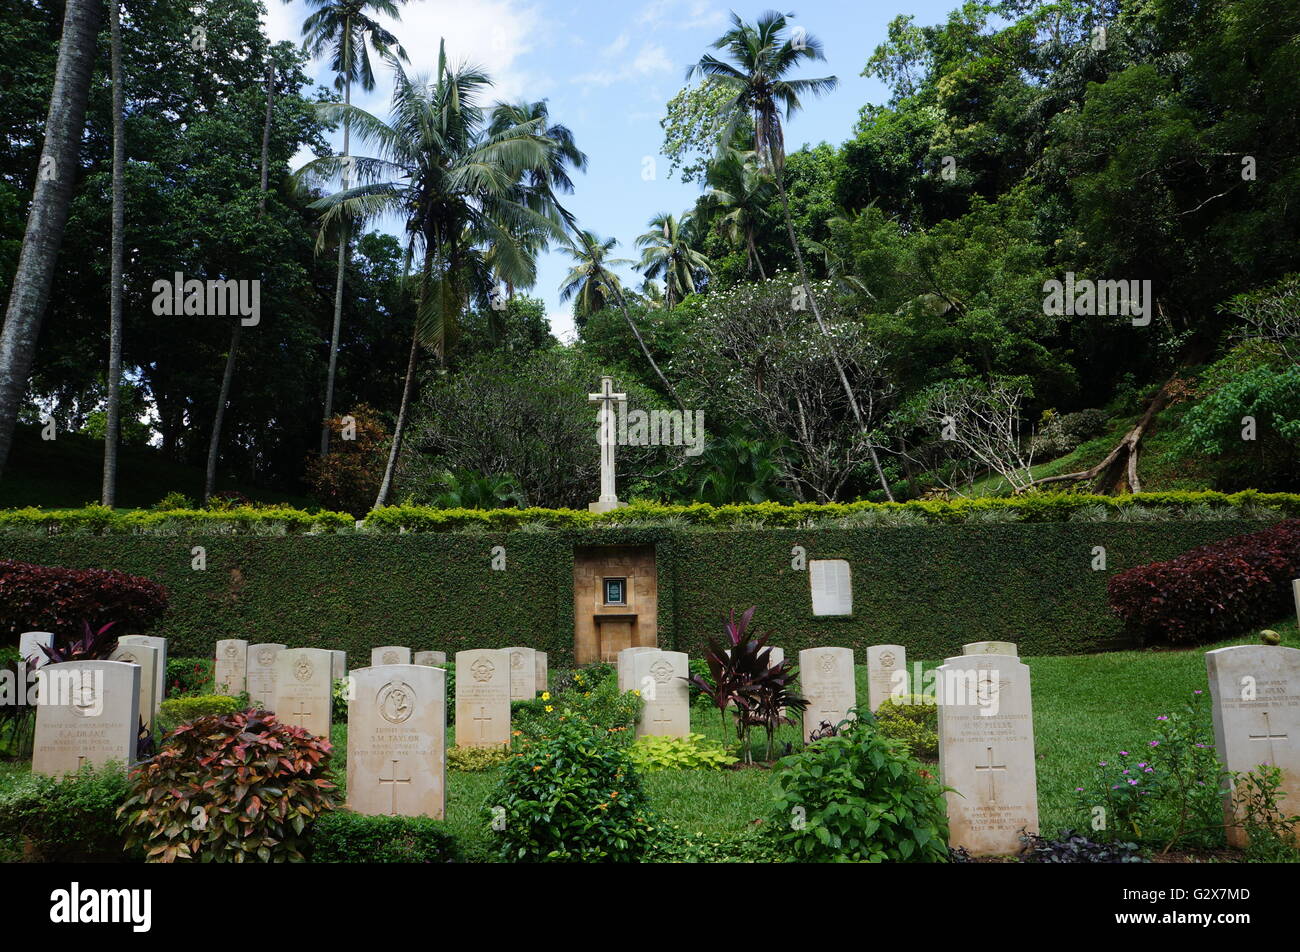 Headstones of British and South Asian soldiers fallen during the Second World War against the Japanese Army at Kandy War Cemetery, Sri Lanka. Stock Photo